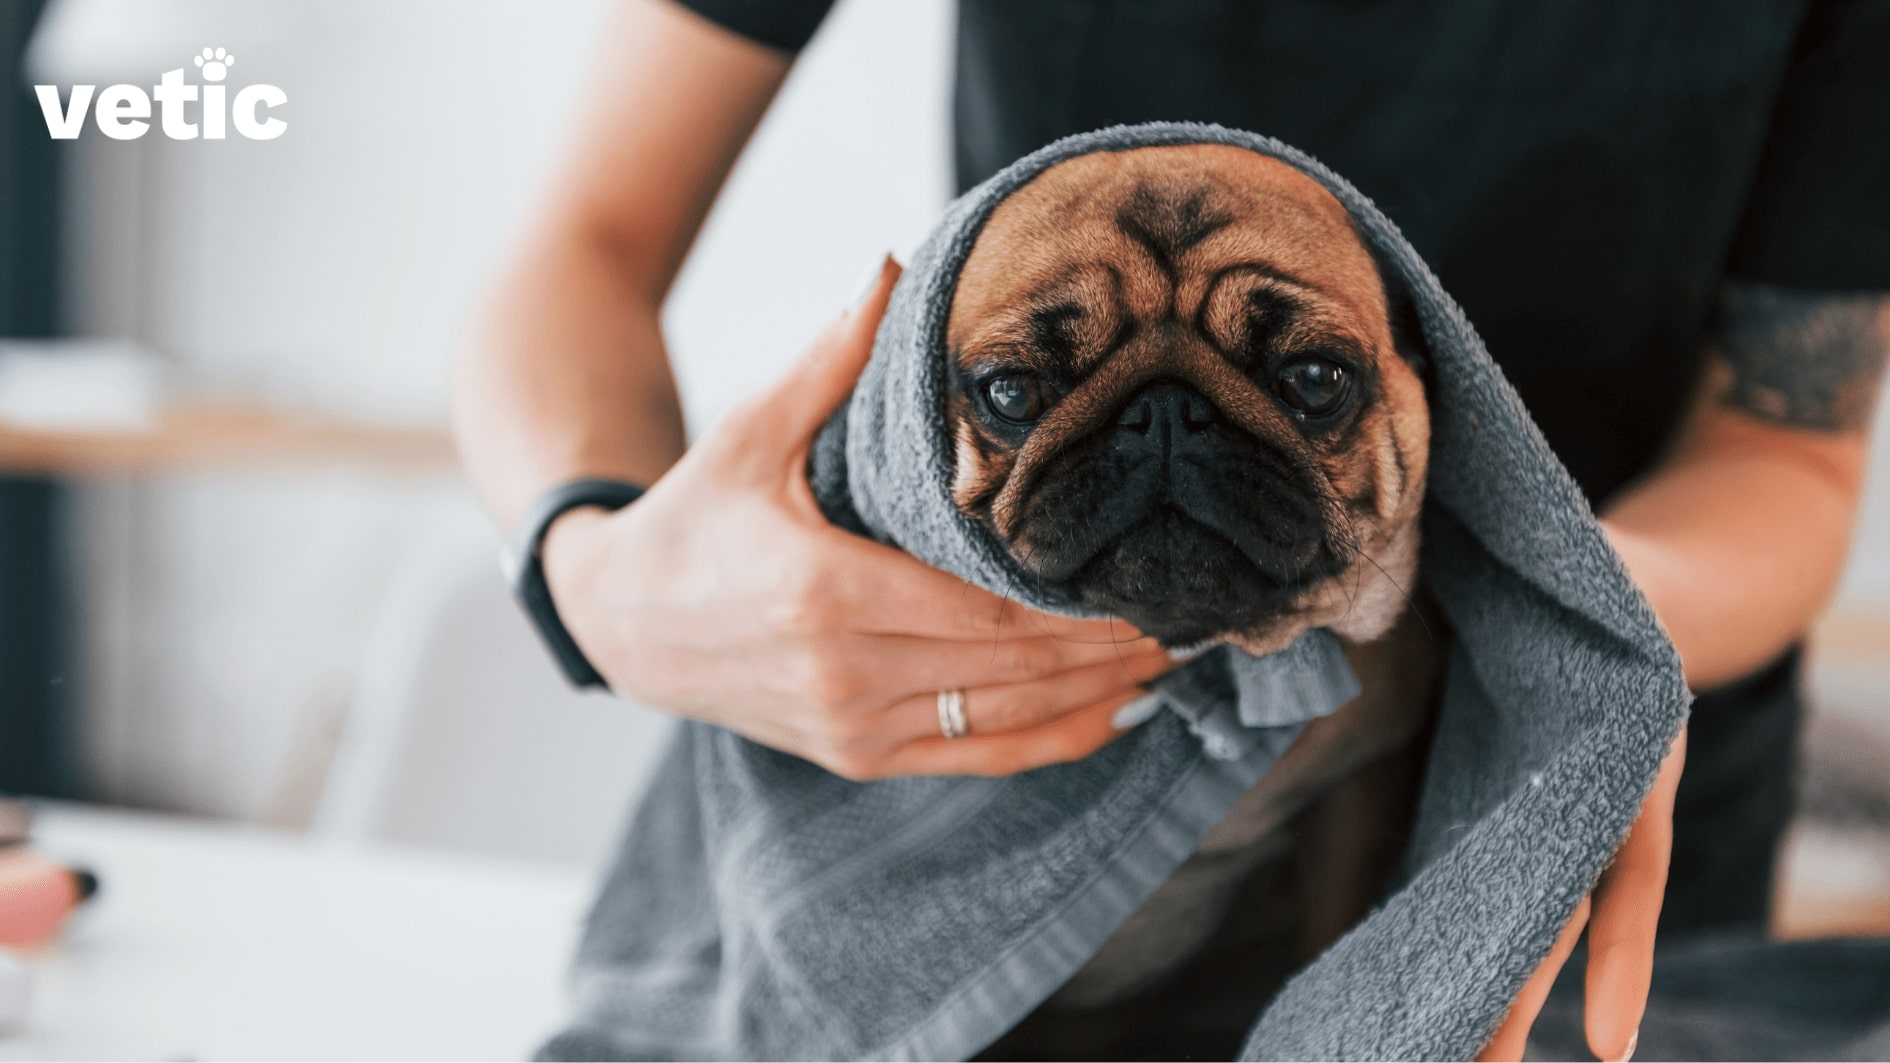 pug being dried with a grey towel after dog grooming services